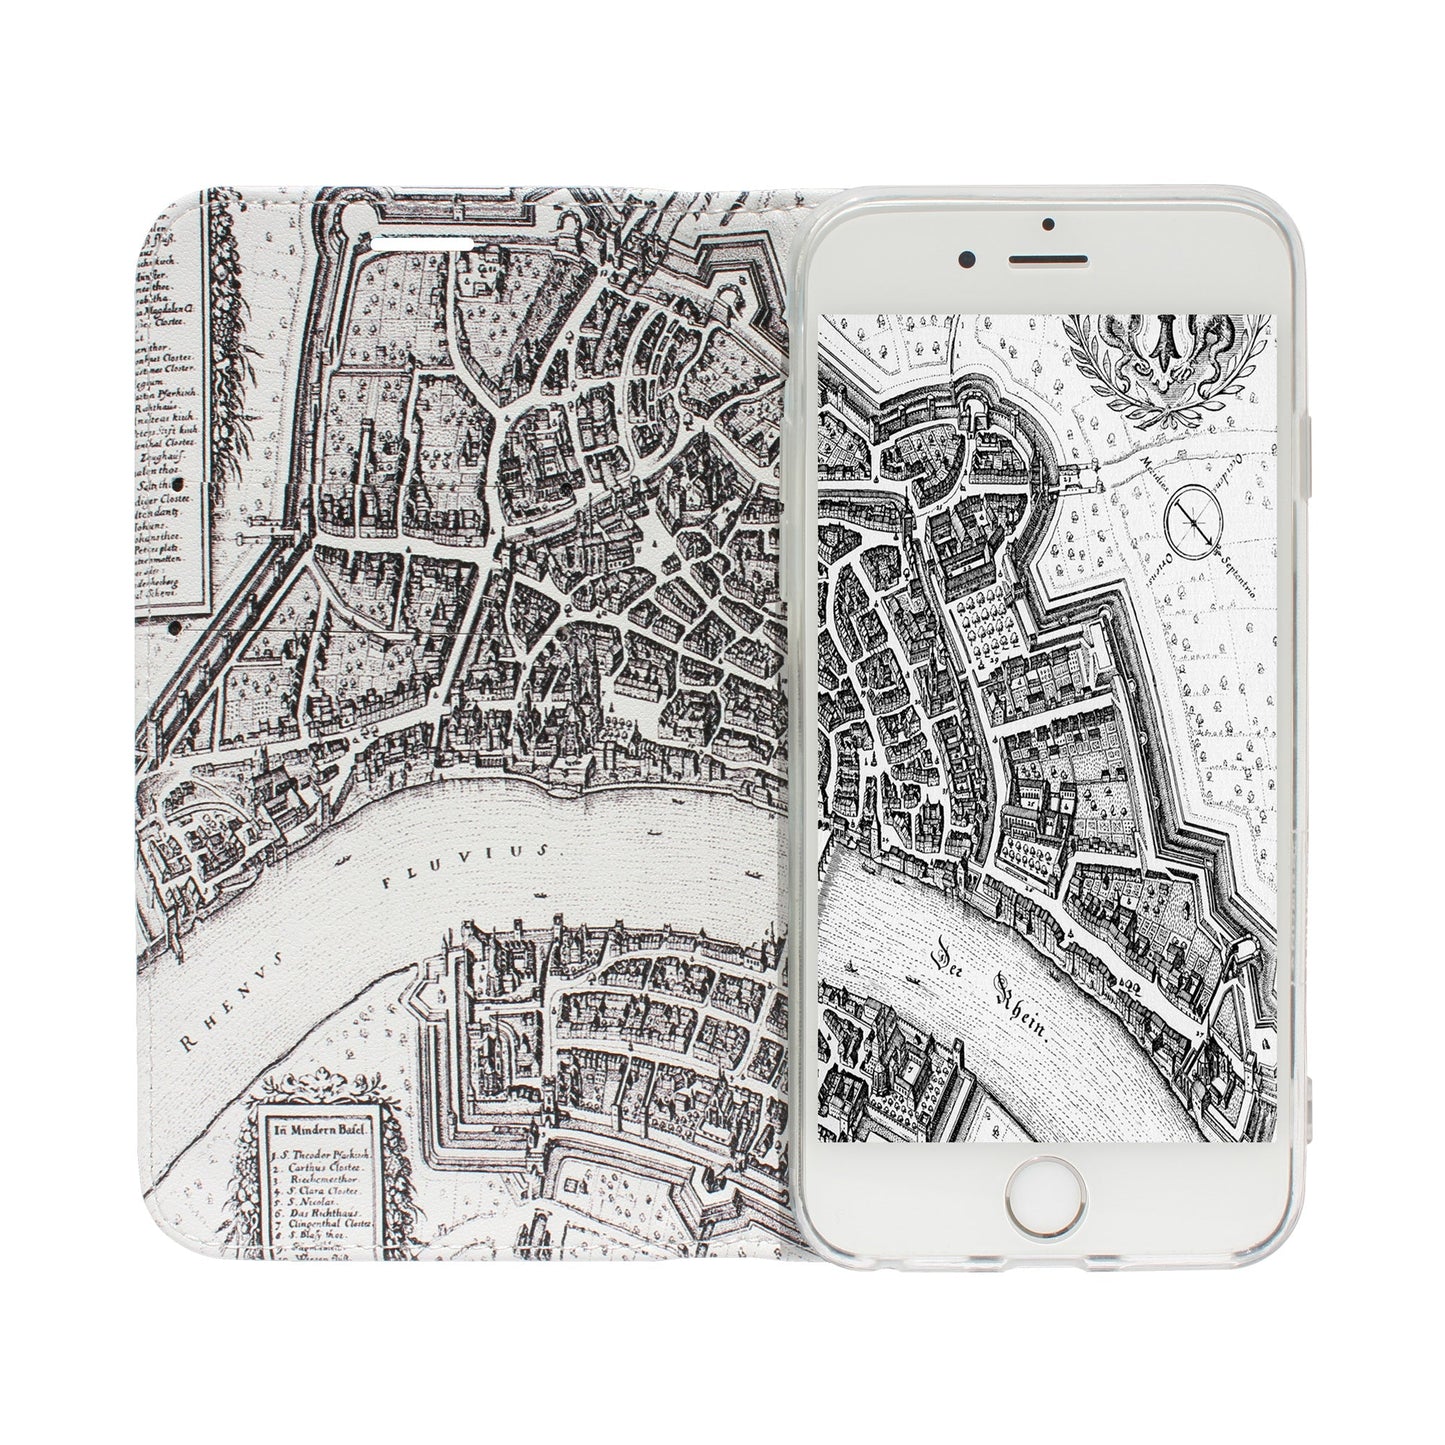 Basel Merian panorama case for iPhone 5/5S/SE 1